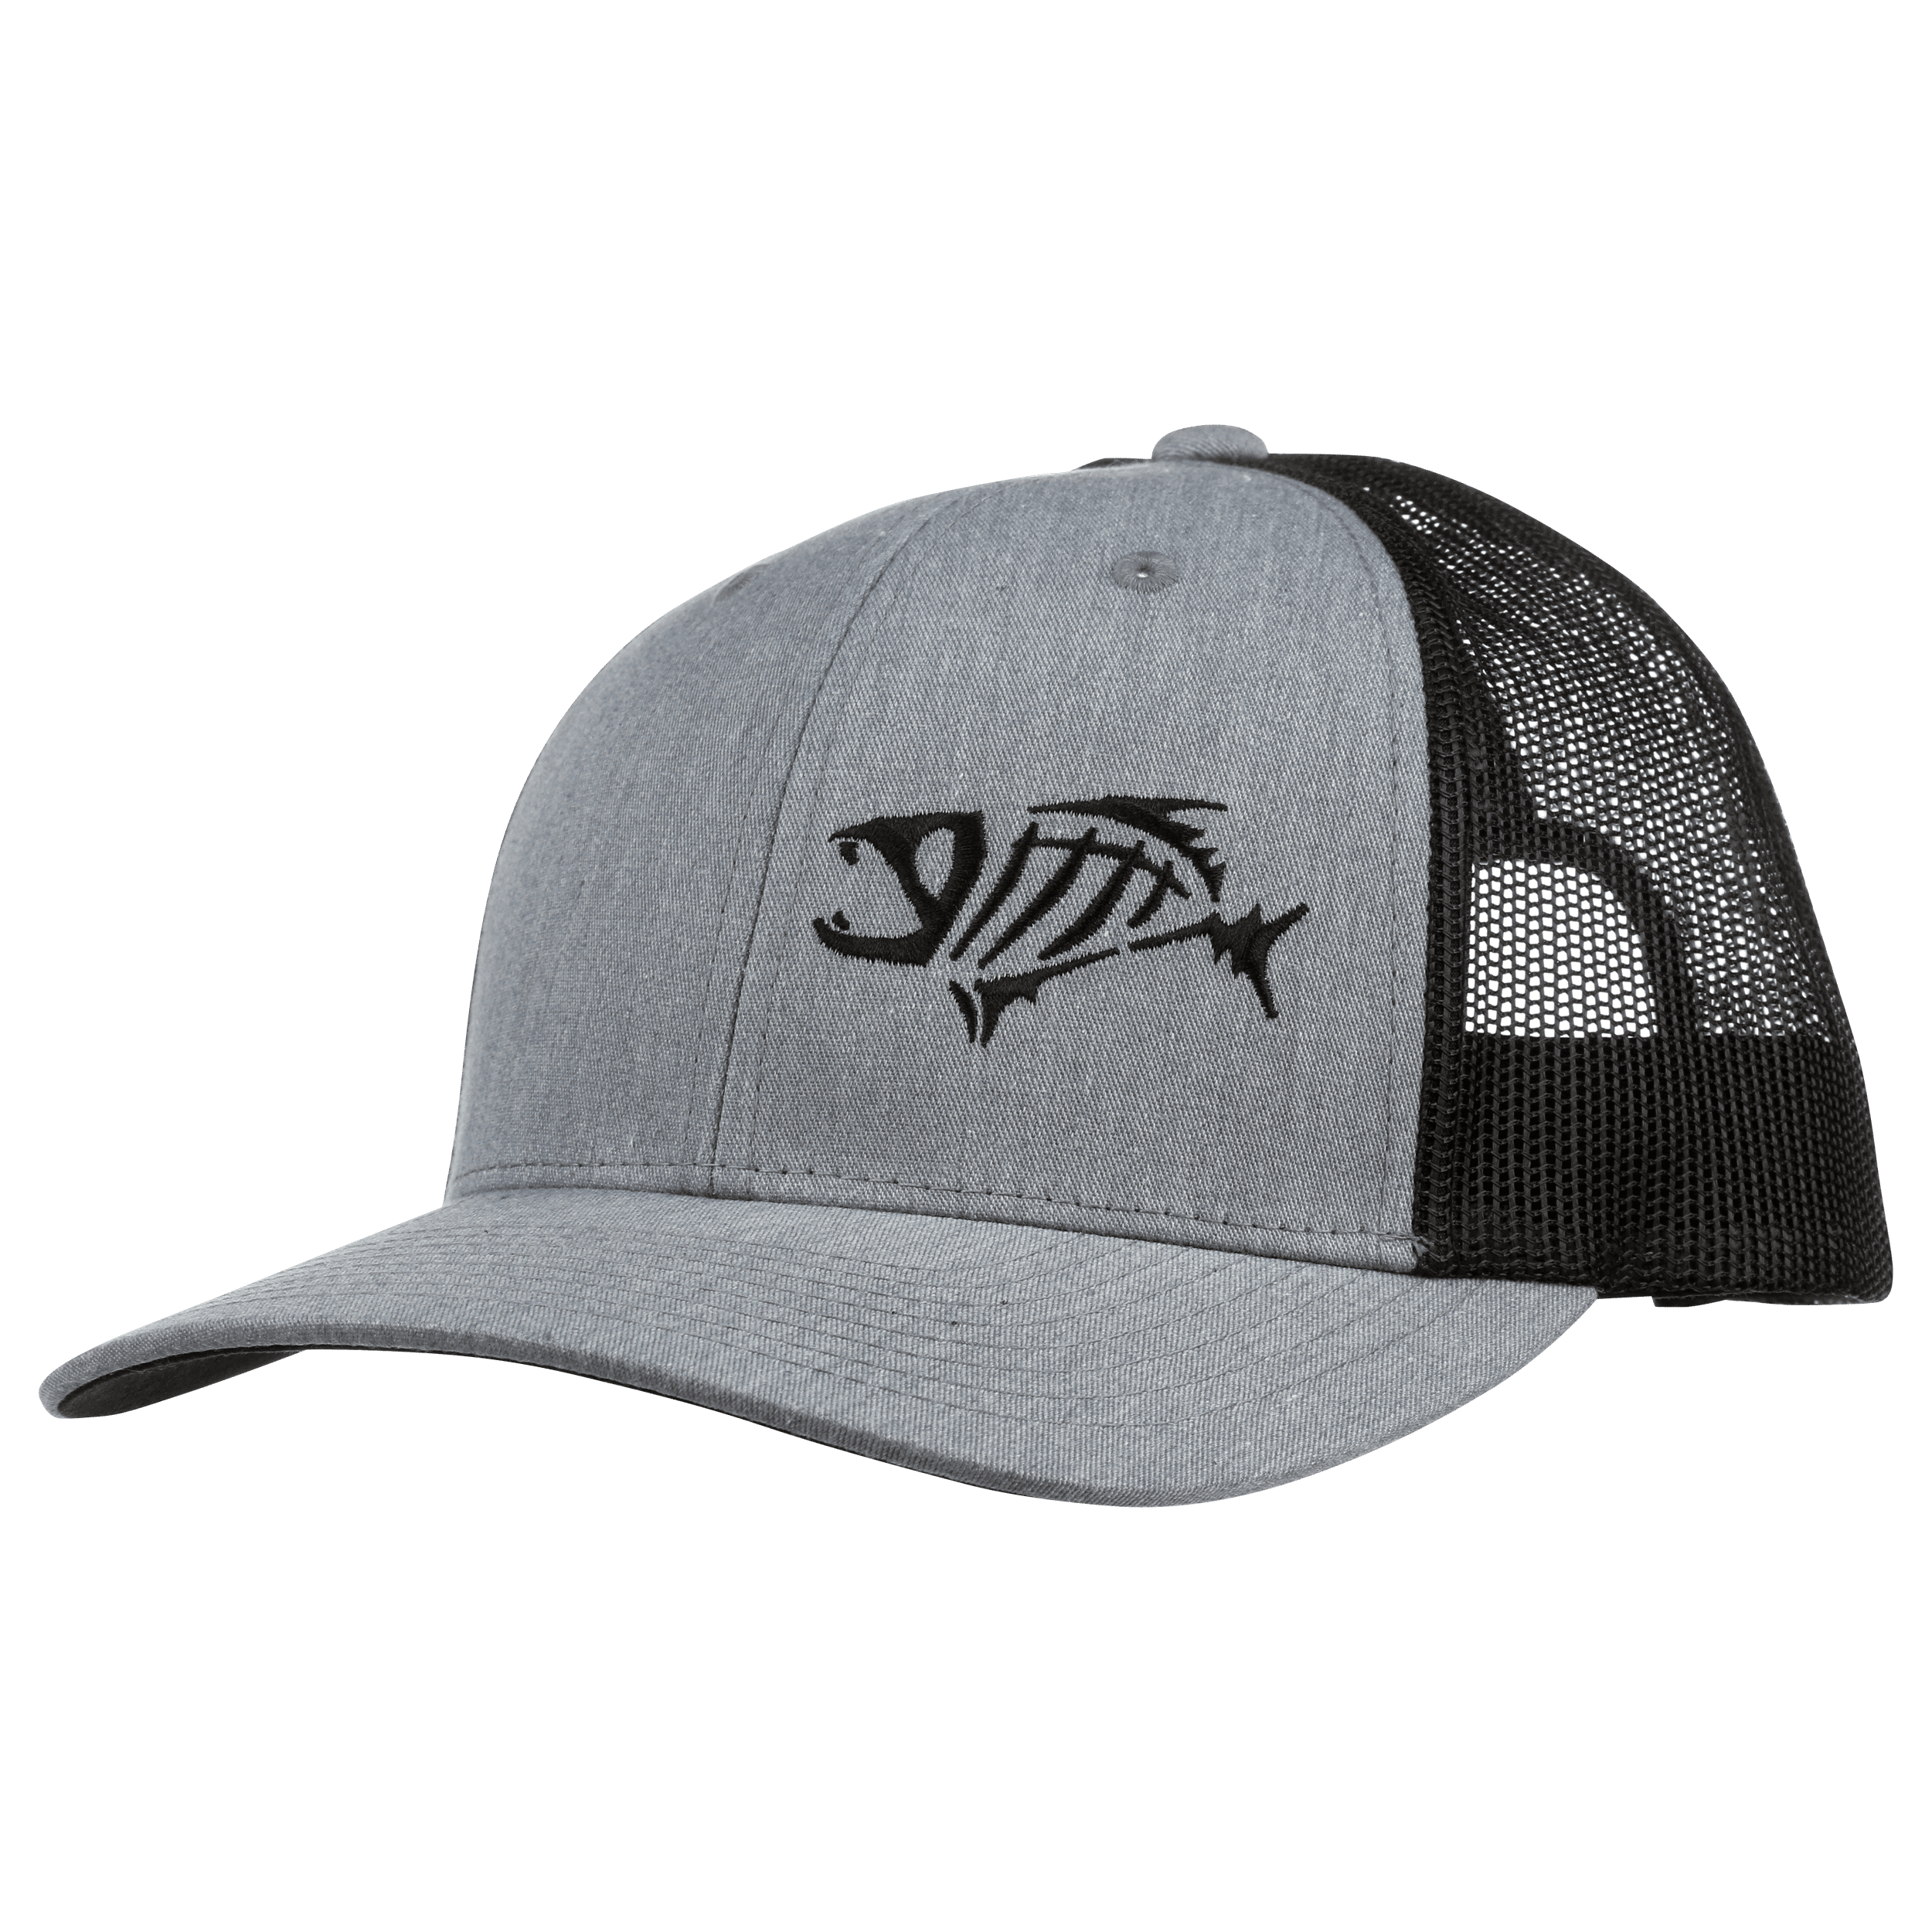 Gloomis Fishing Gloomis Low Hit Profile Cap - Gray, One Size Fits